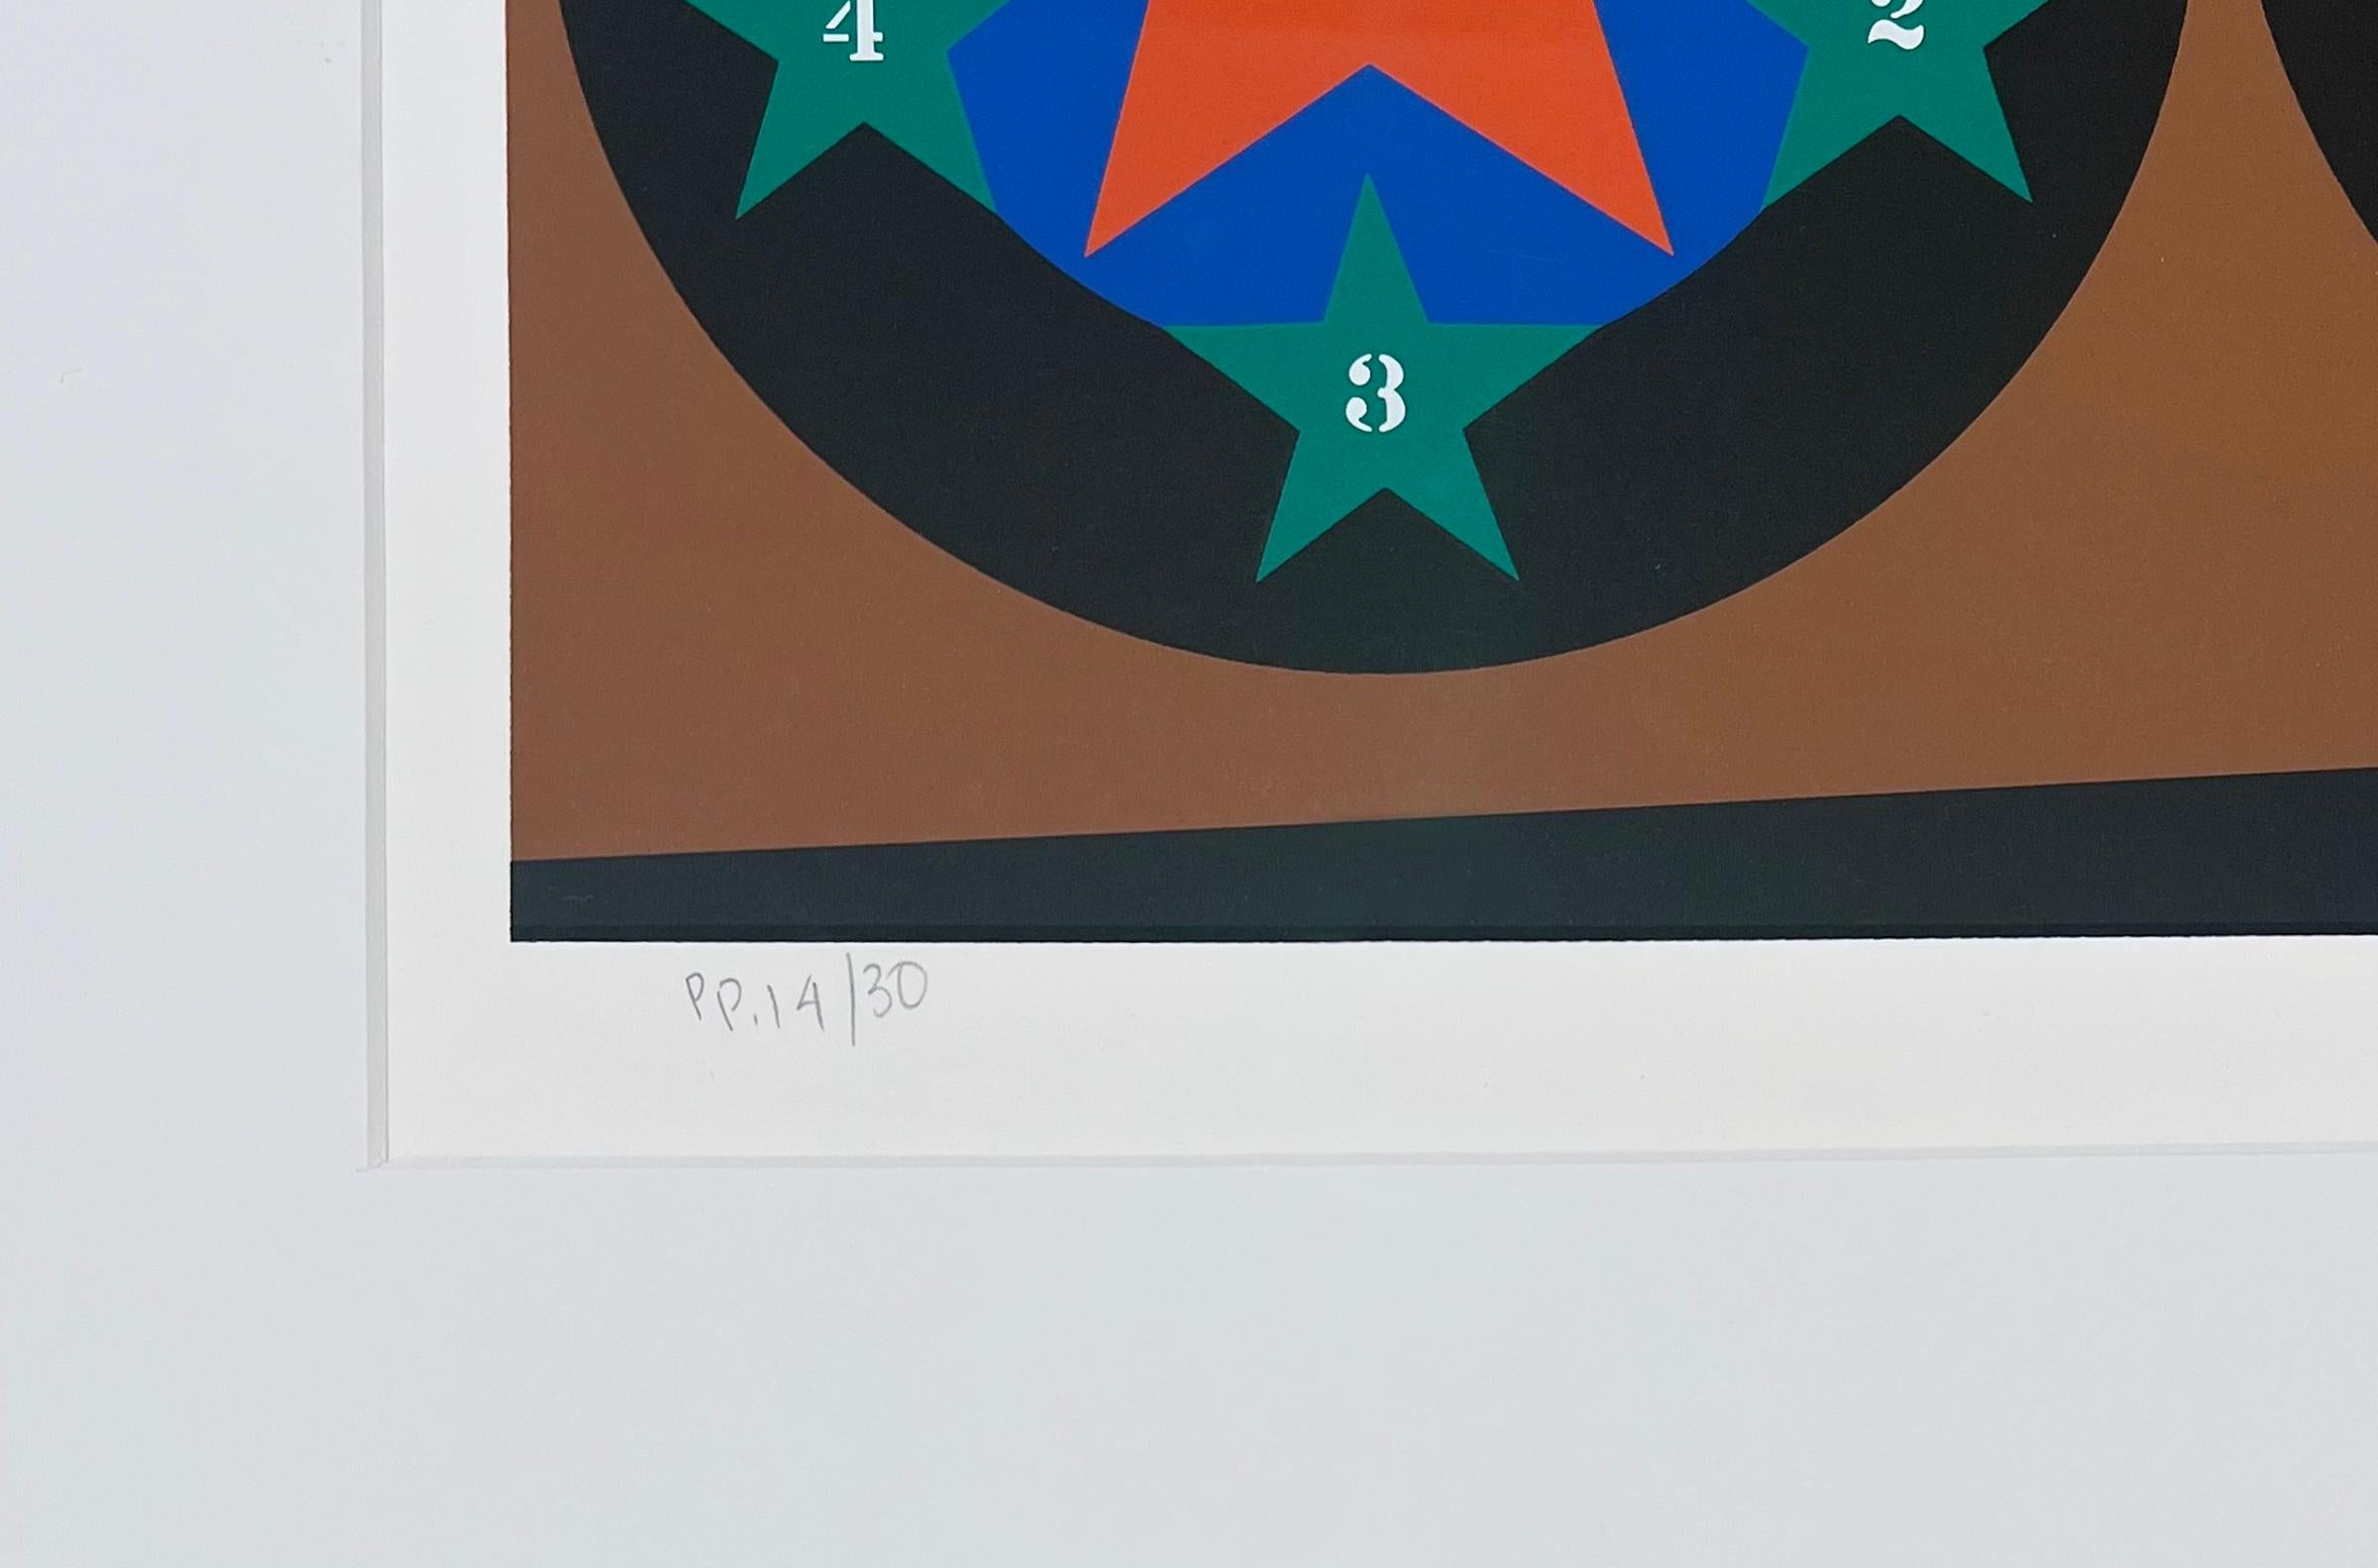 Artist: Robert Indiana
Title: The American Dream
Portfolio: The American Dream
Medium: Serigraph
Year: 1997
Edition: PP 14/30 (aside from the edition of 395)
Frame Size: 26 1/2